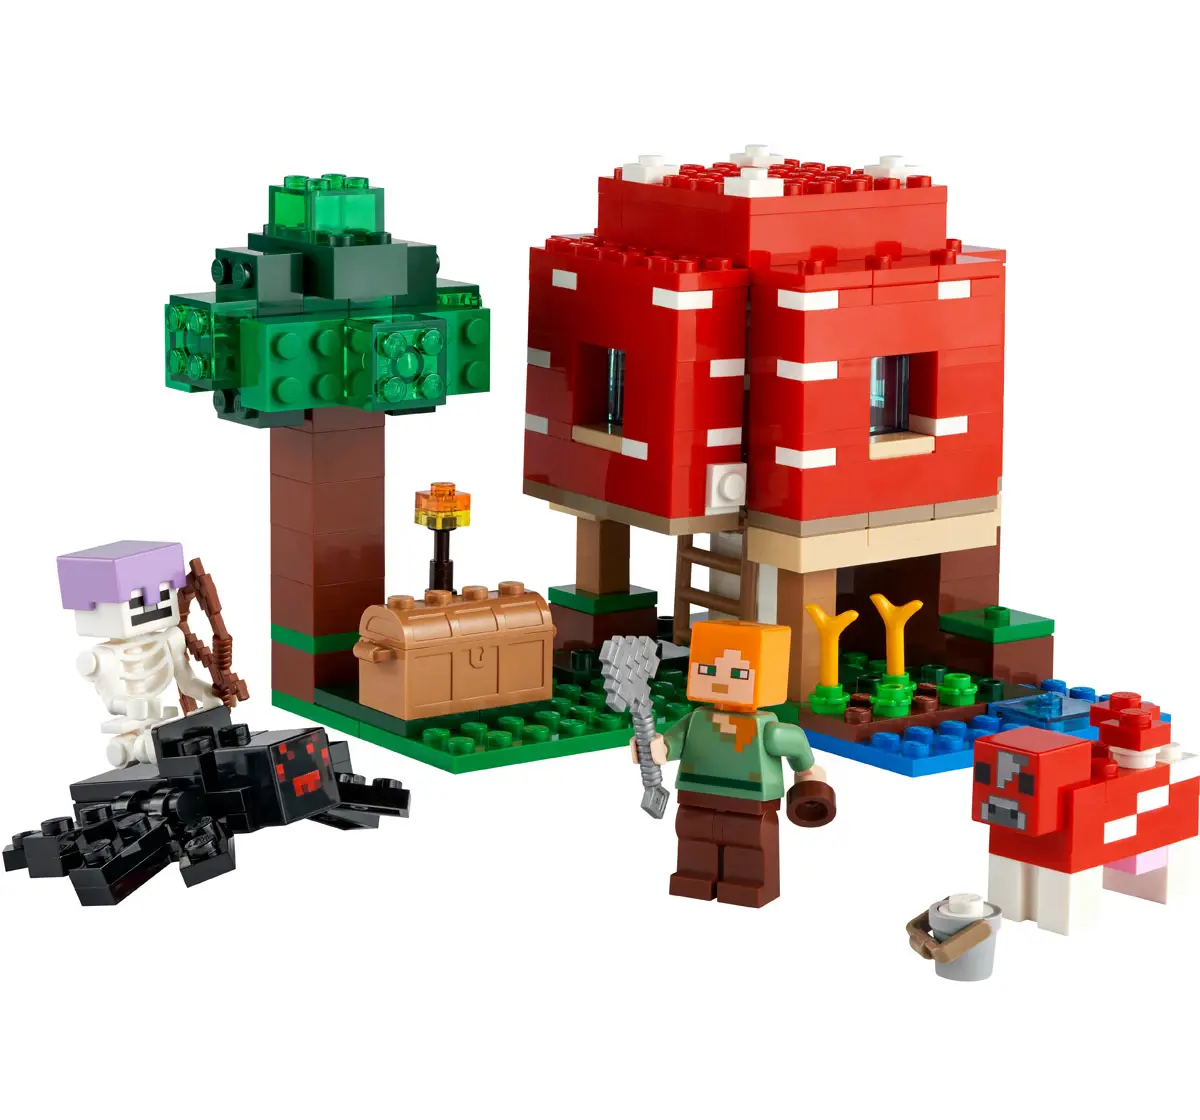 Lego Minecraft The Mushroom House 21179 Building Kit Multicolour For Kids Ages 8Y+ (272 Pieces)